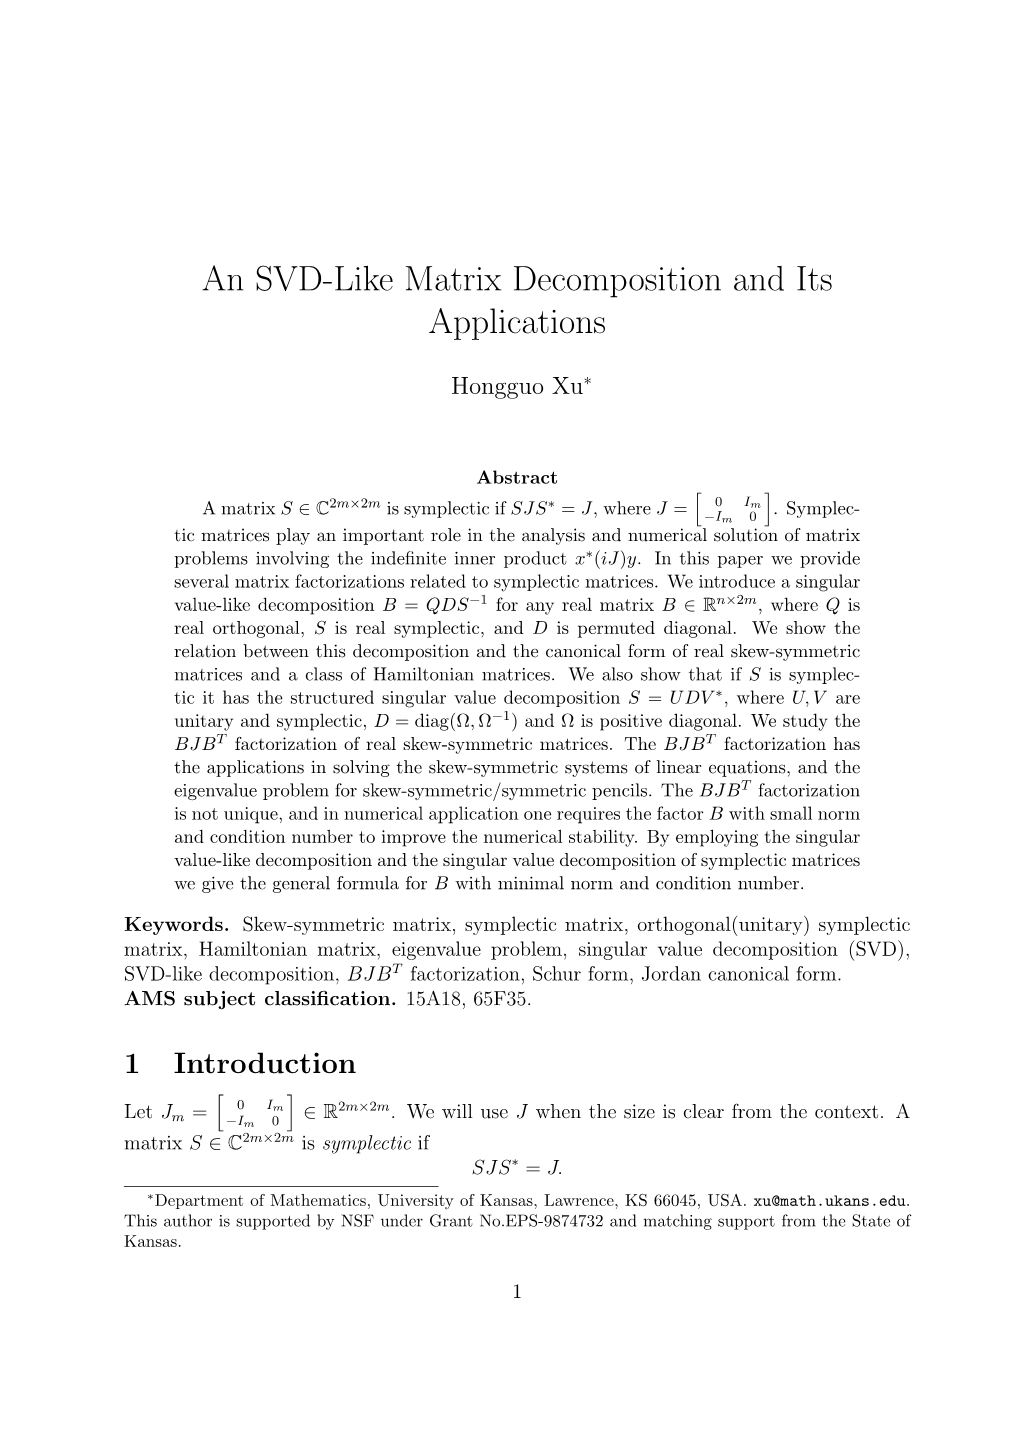 An SVD-Like Matrix Decomposition and Its Applications